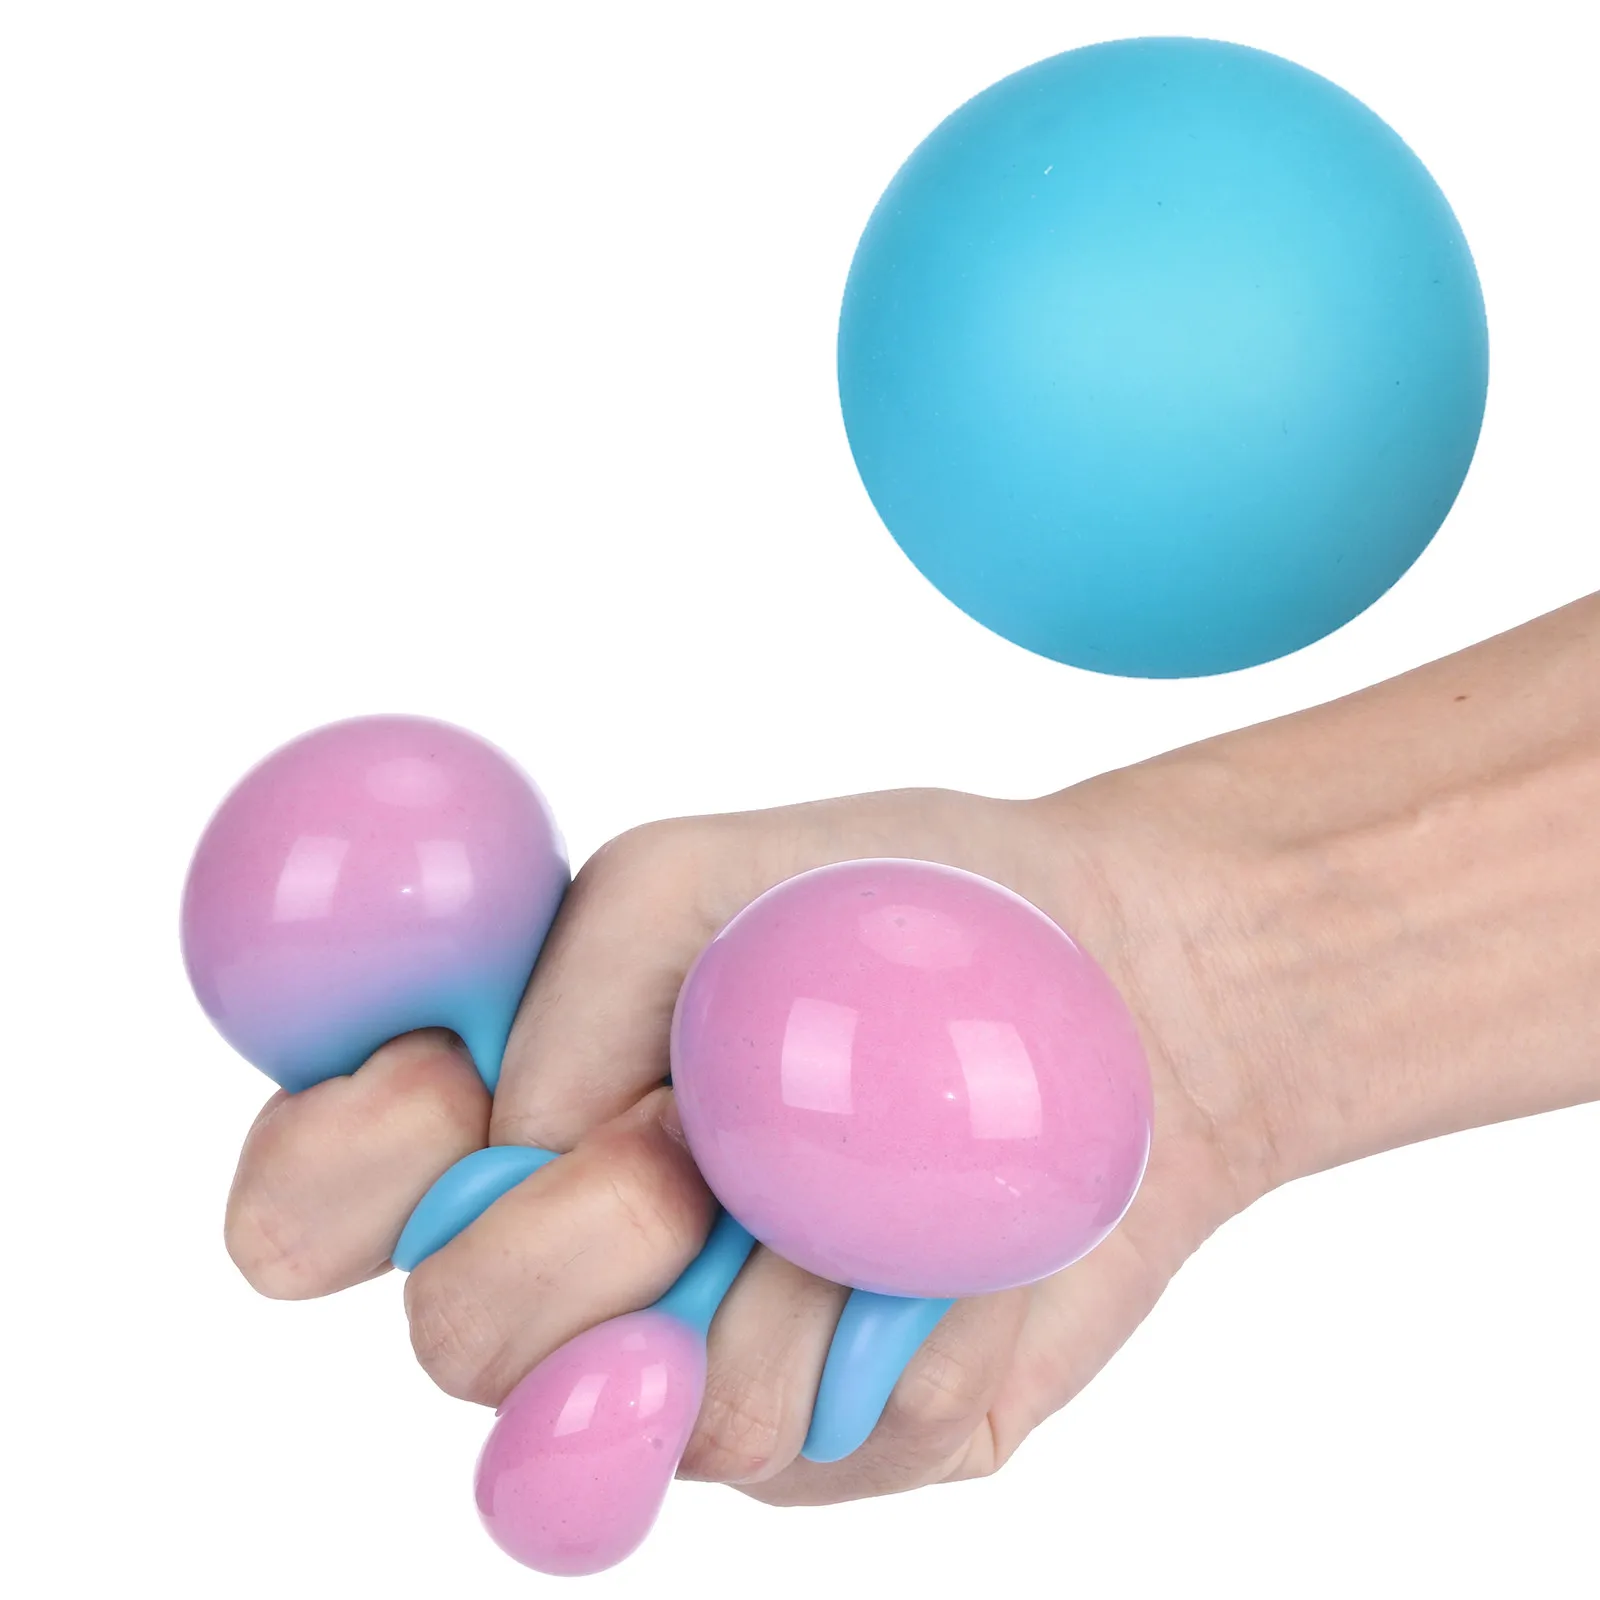 Antistress Pressure Needoh Ball Stress Relief Change Colour Squeeze Balls Dna For Kids Adults Hand Fidget Toy Squishy Stressball enlarge